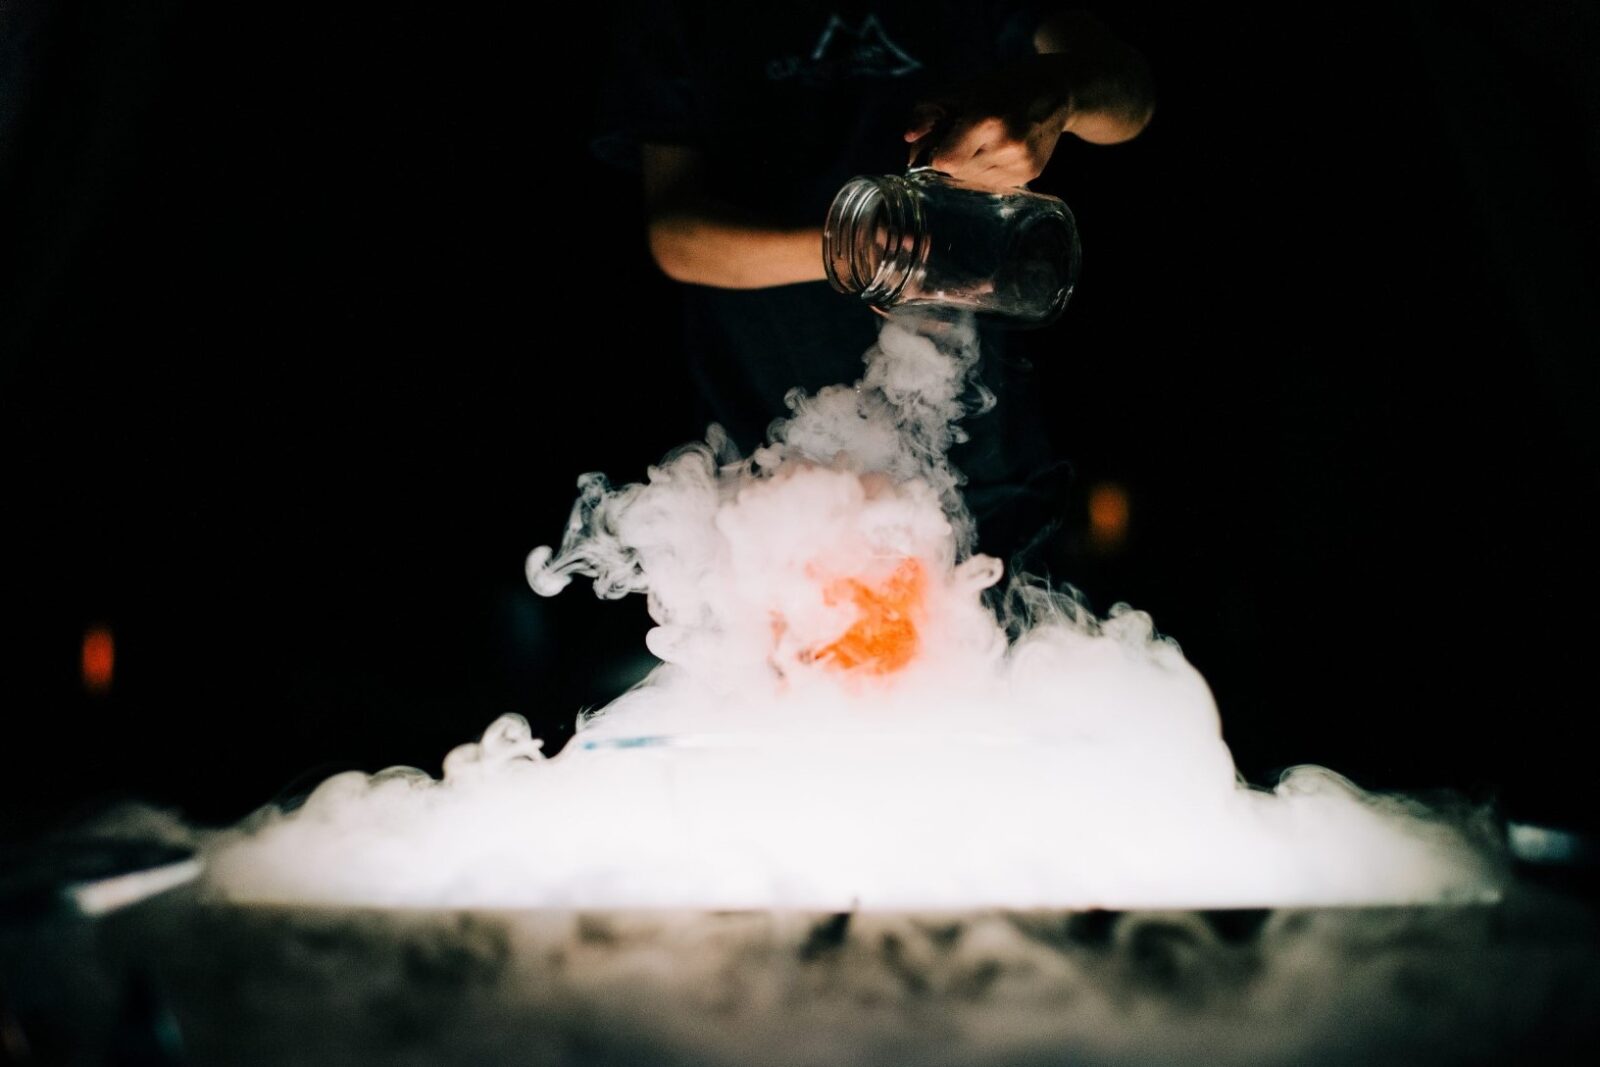 How to dispose of dry ice safely - Valuable 6 Steps & 7 Tips